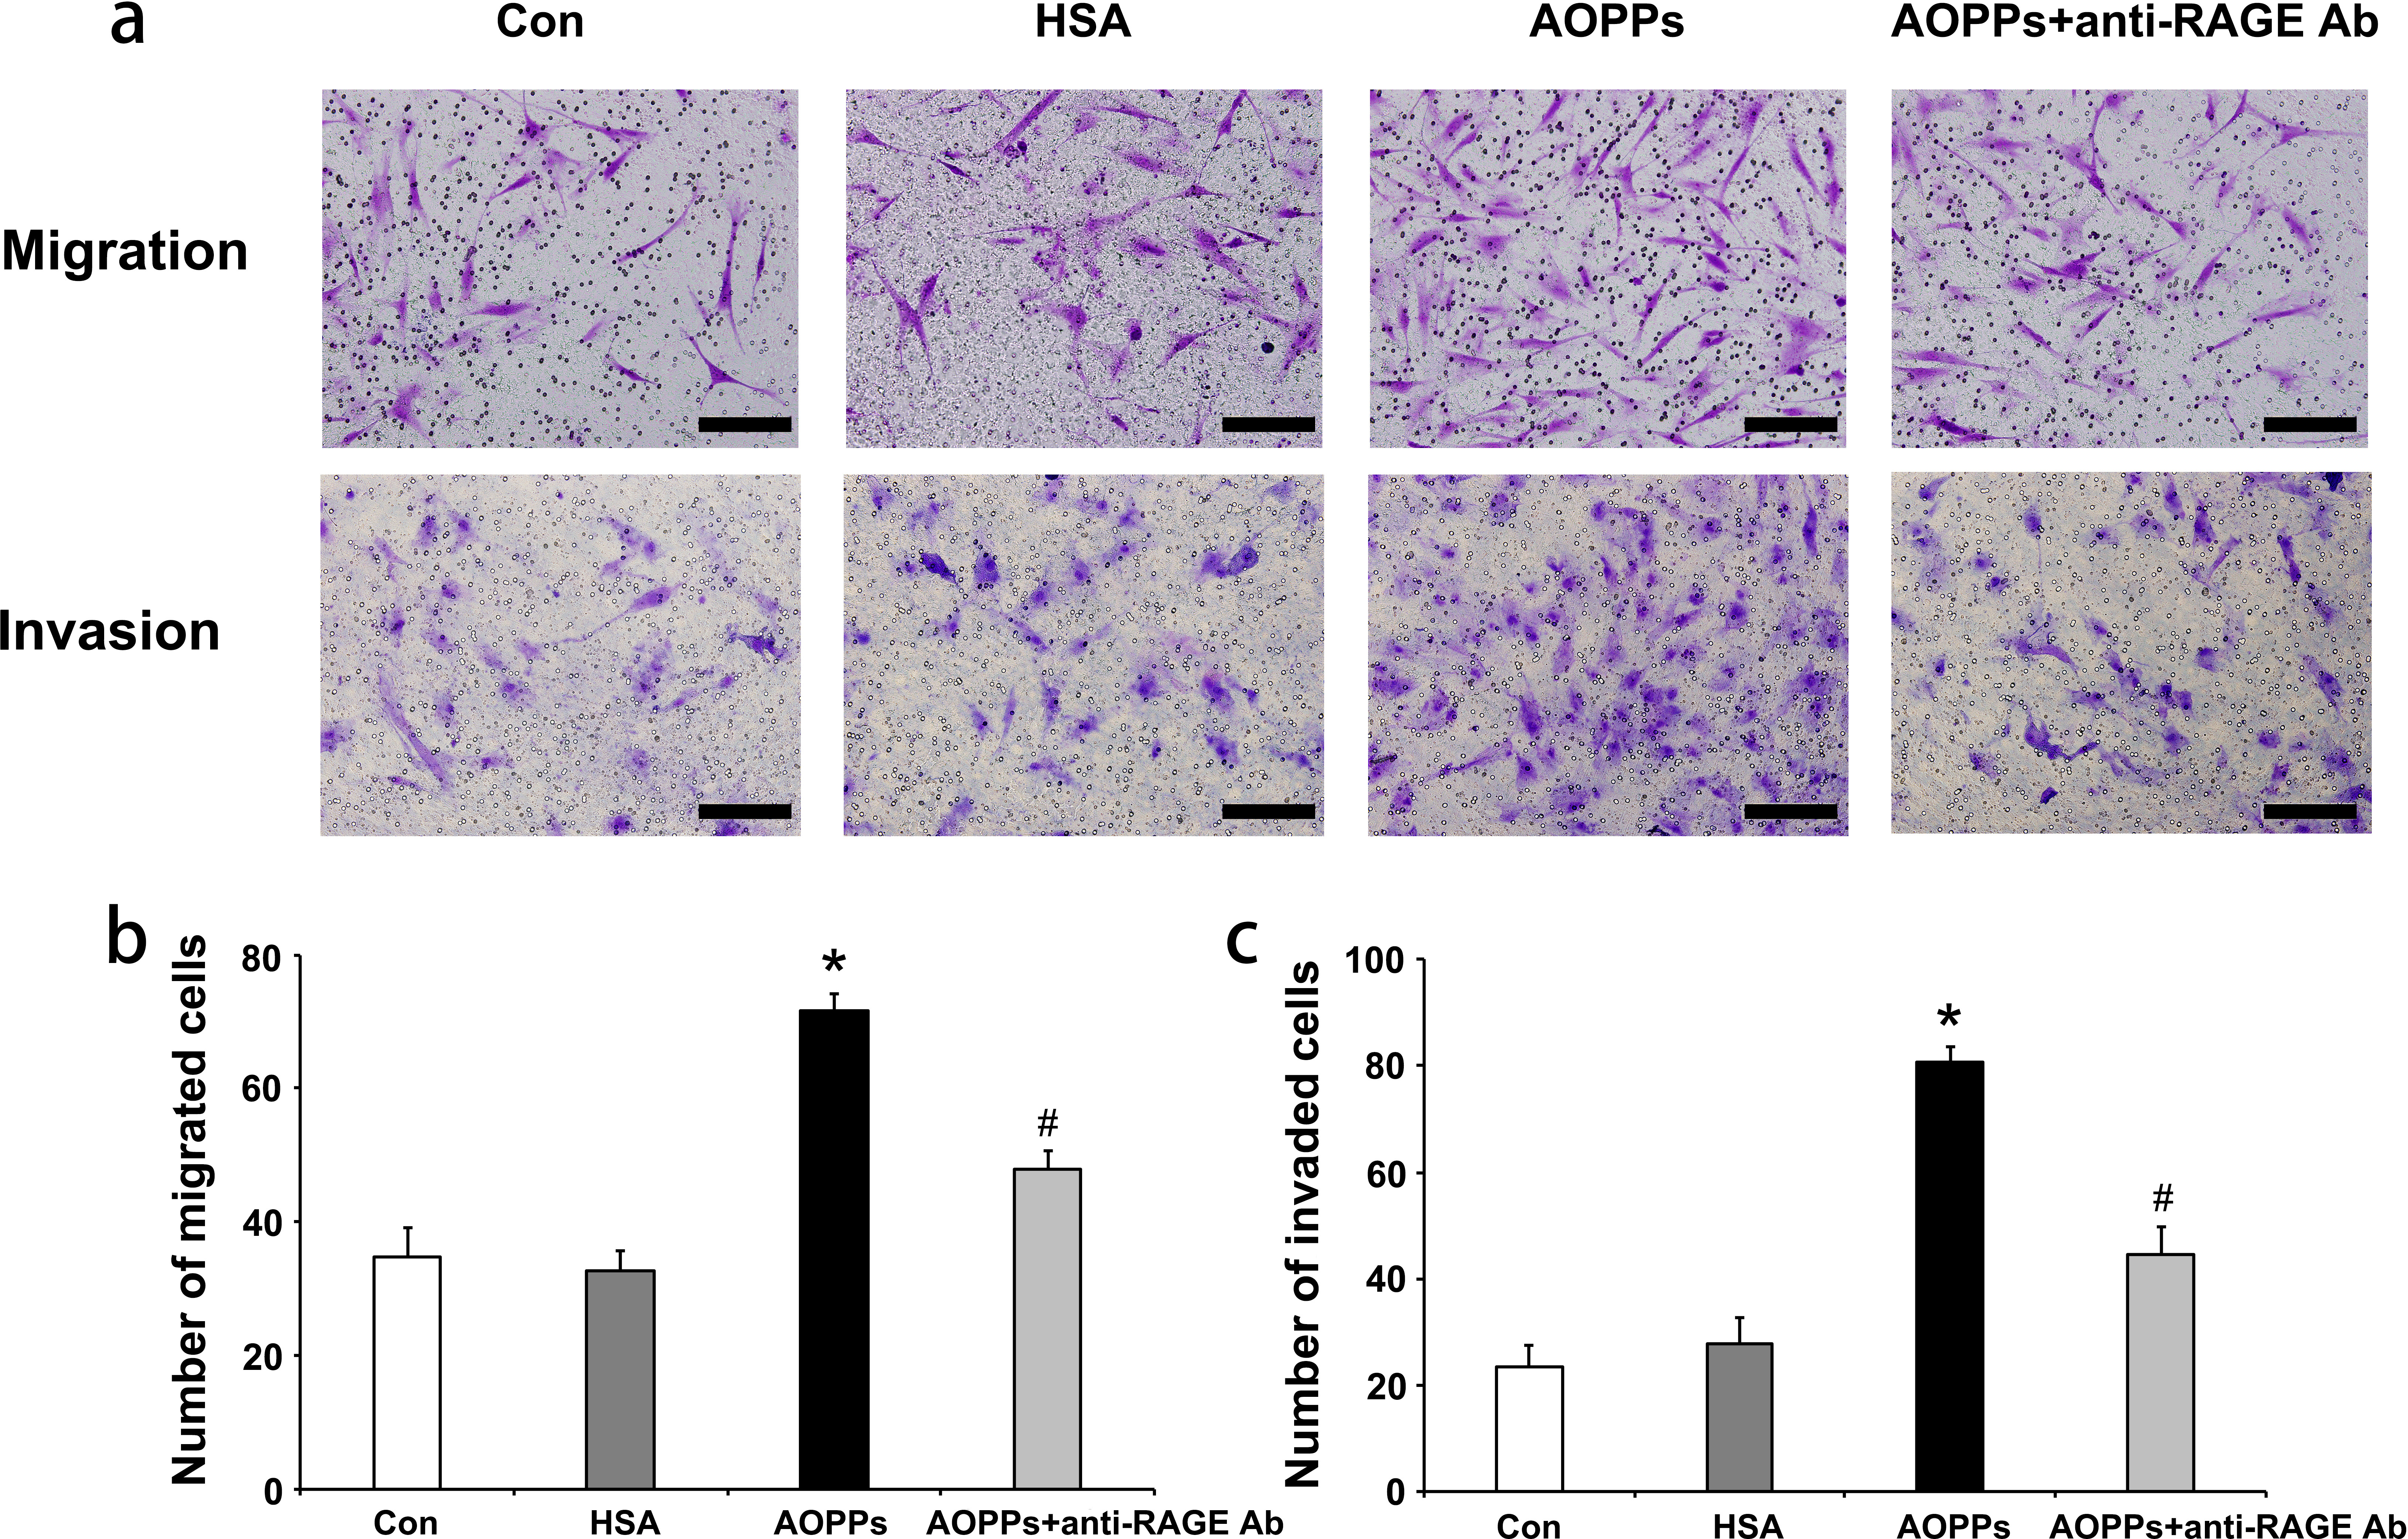 Fig. 1 
            a) Advanced oxidation protein products (AOPPs) promote the migration and invasion of rheumatoid arthritis fibroblast-like synoviocytes (RA-FLSs) in vitro. After RA-FLSs were incubated with medium alone (control), native human serum albumin (HSA), or AOPP-HSA (100 μg/ml) for 48 hours, cell migration and cell invasion were measured. In the blocking test, RA-FLSs were pretreated with a neutralizing anti-receptor for advanced glycation end products (RAGE) antibody (10 µg/ml) for one hour, followed by treatment with AOPP-HSA (100 µg/ml) for 48 hours. b) and c) The migrated and invaded cells were imaged (200× magnification) and counted in five random fields for each treatment (n = 3). Data are presented as the mean and standard deviation of triplicates. Scale bar, 50 µm. *p < 0.05 versus medium alone (control). #p < 0.05 versus the AOPP group. Con, control.
          